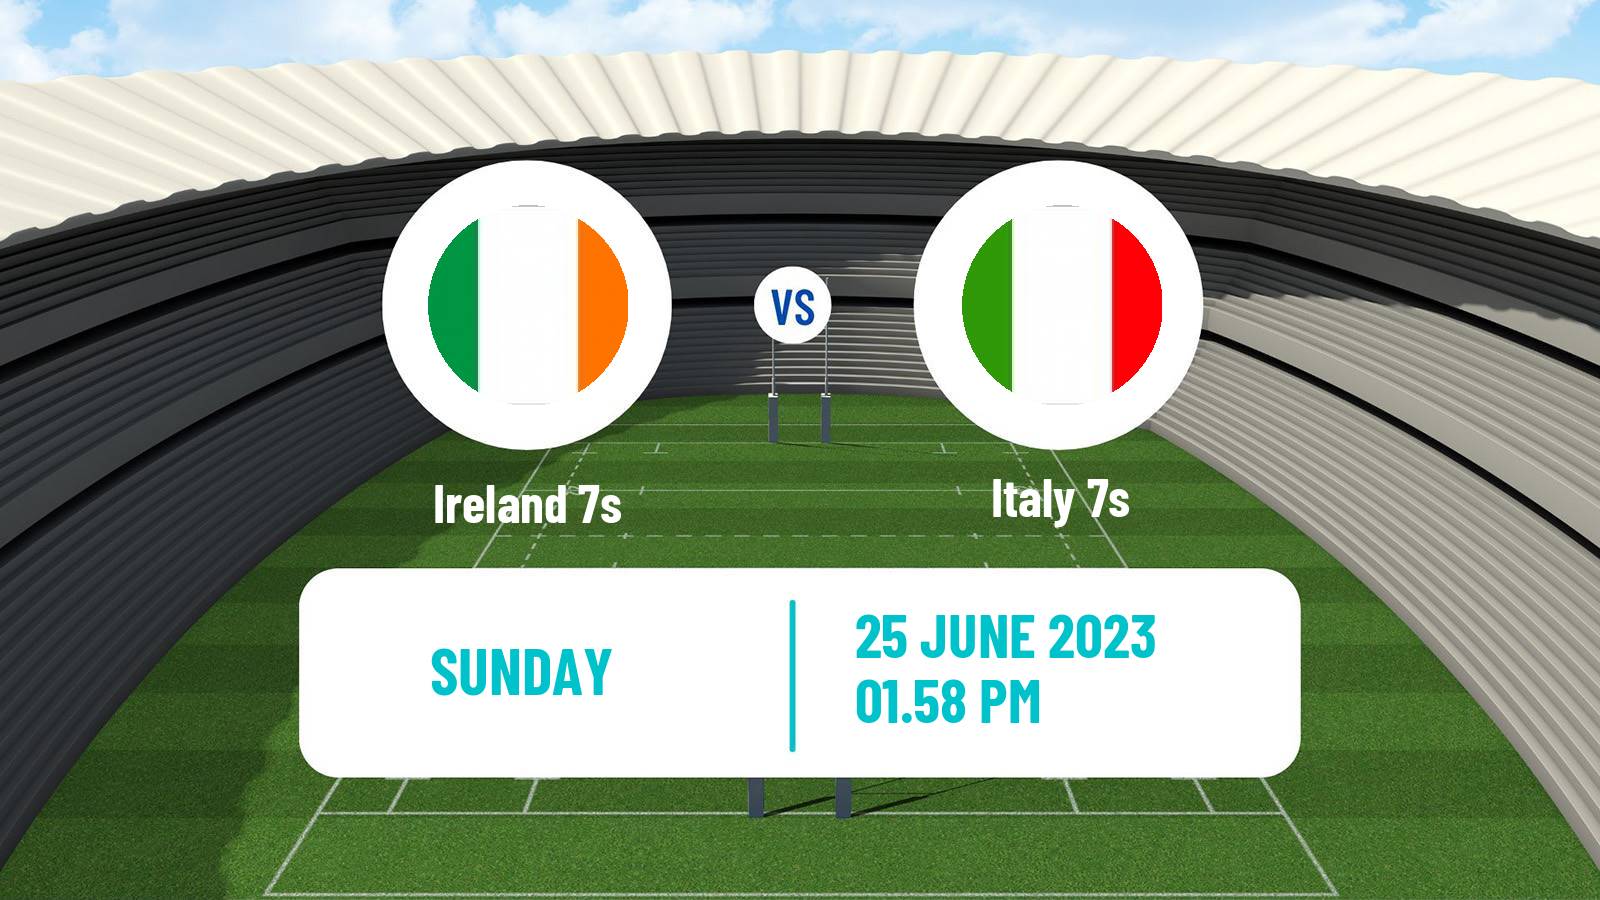 Rugby union European Games 7s Rugby Ireland 7s - Italy 7s